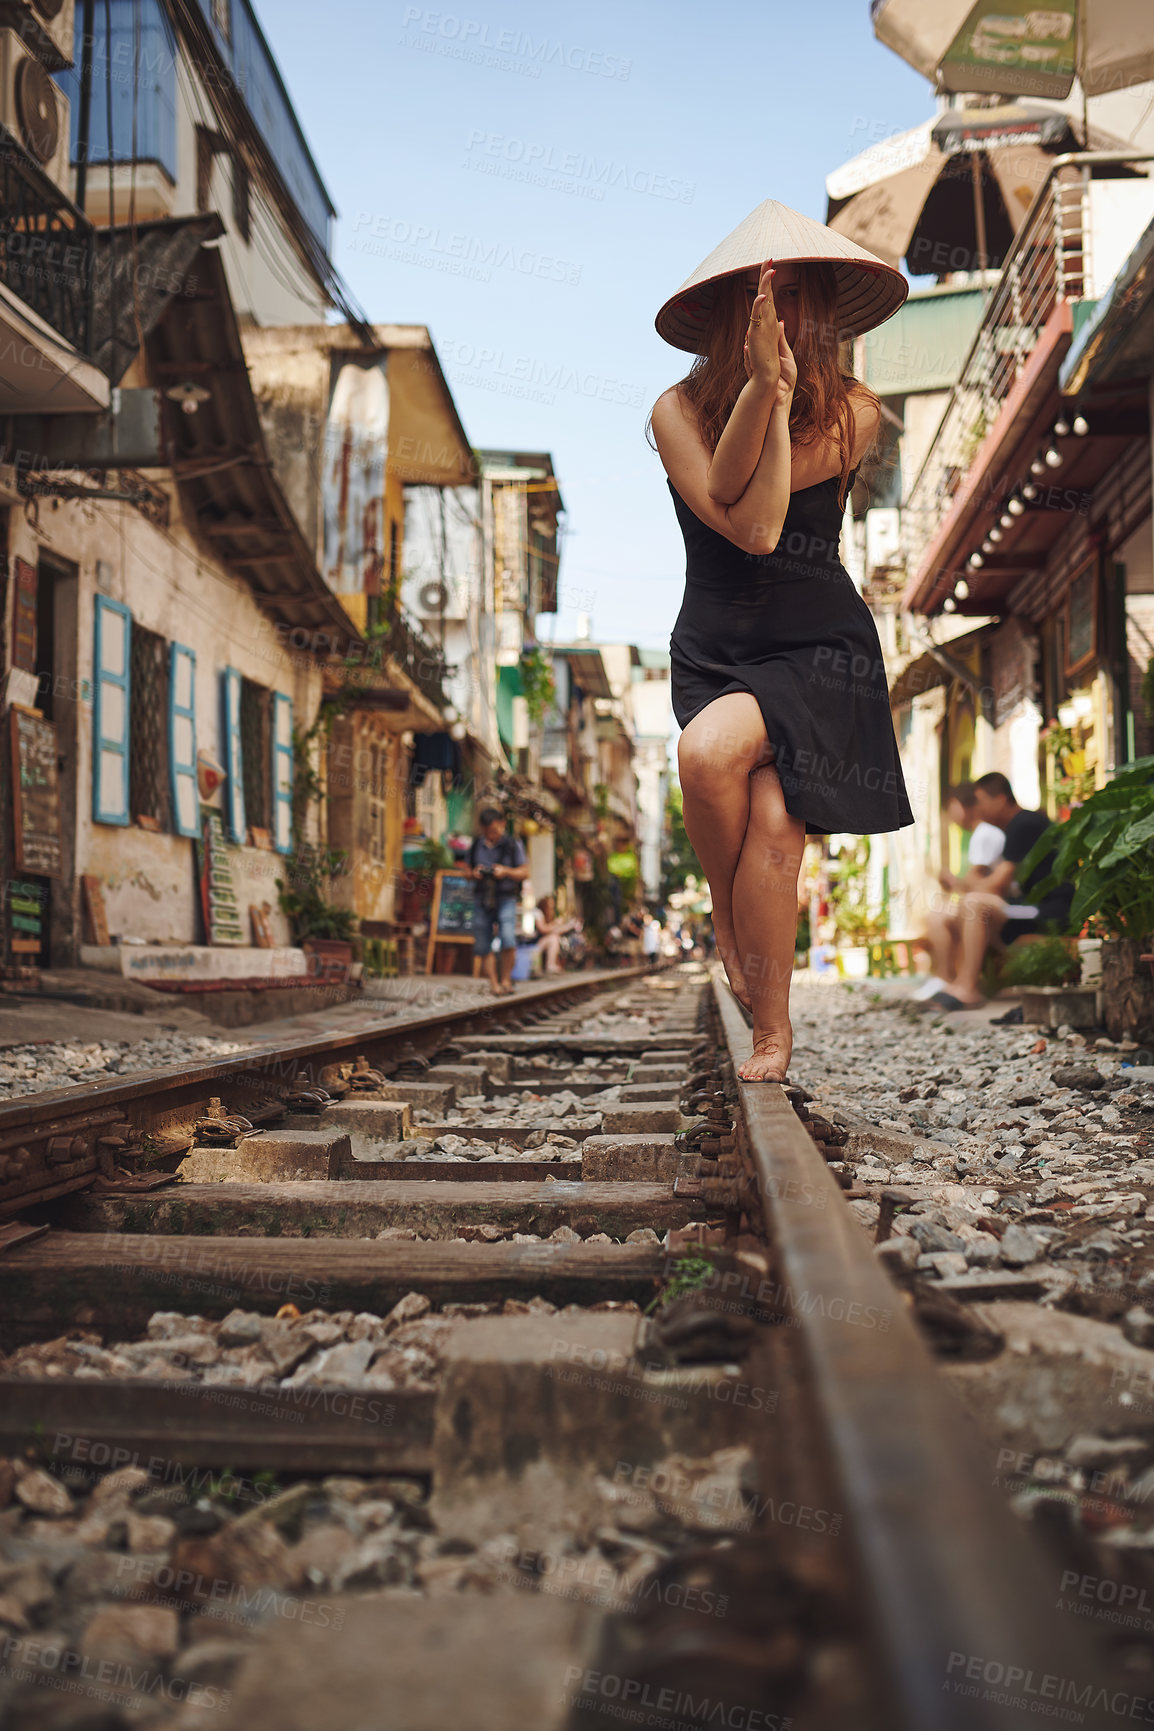 Buy stock photo Shot of a woman practising yoga while out on the streets of Vietnam